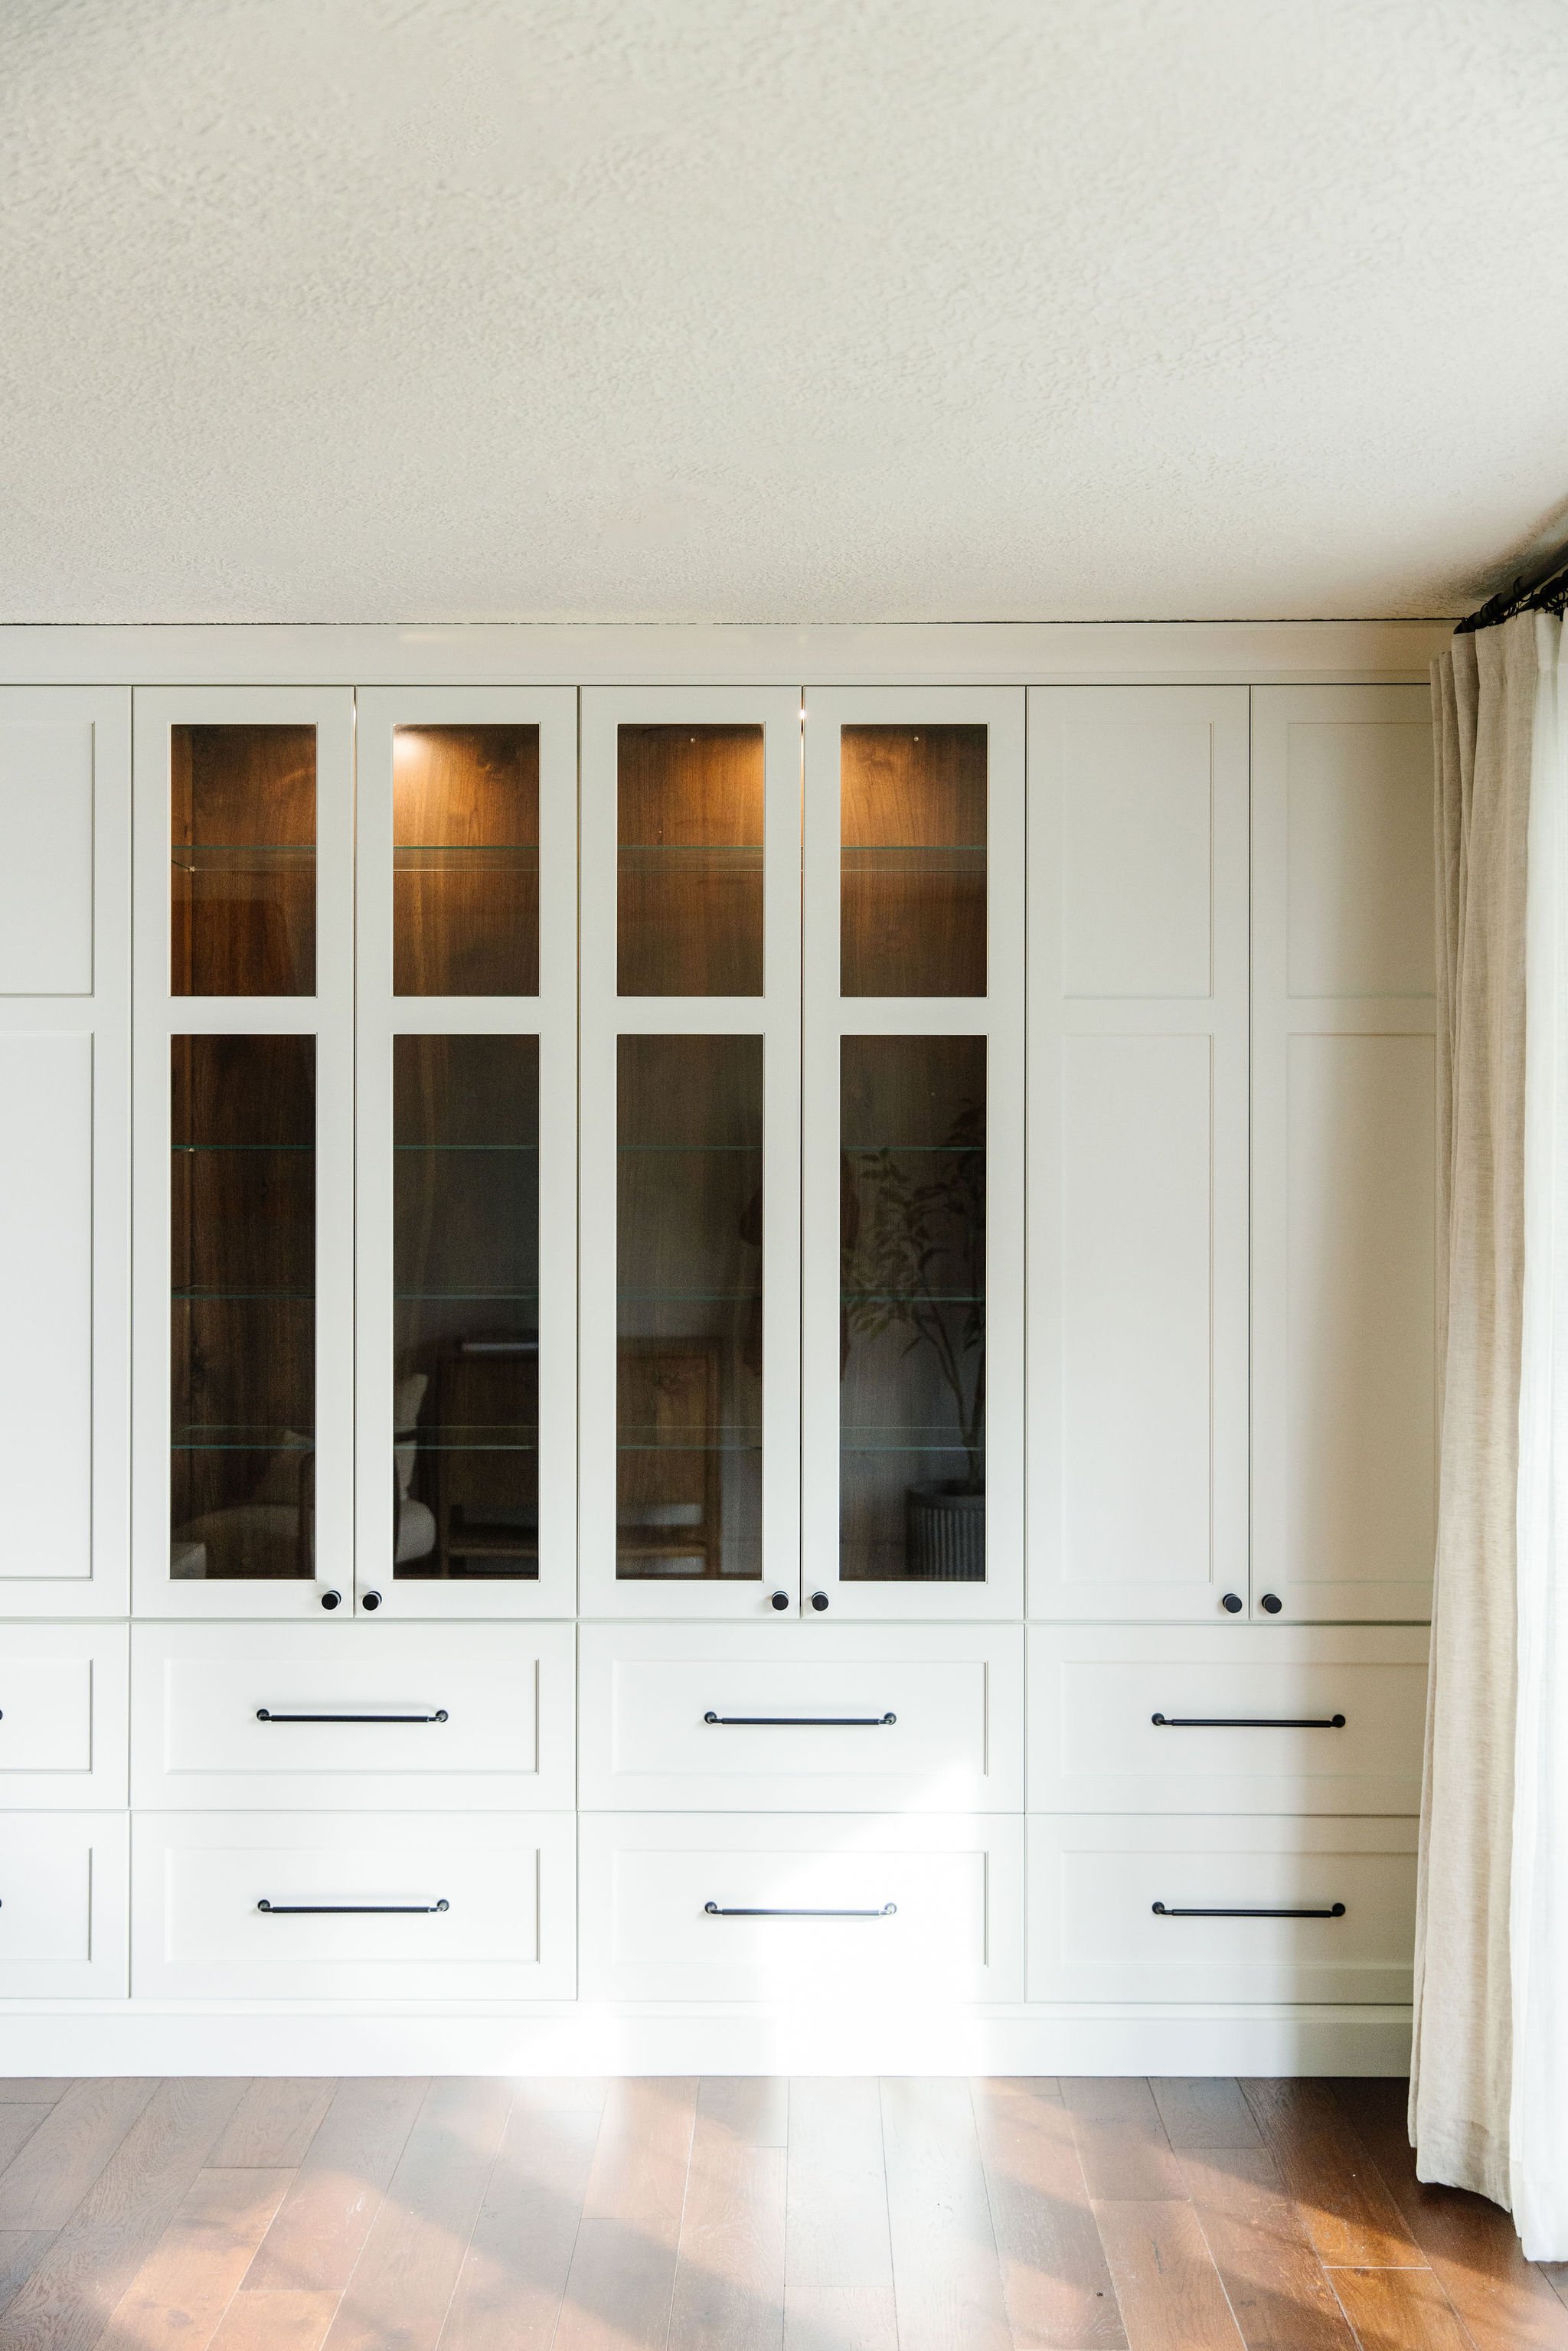  The white of these built-in cabinets is accented by the large handles and in-cabinet lighting. White build ins large drawer handles in cabinet lighting wooden floors#glasscabnietdoors #cabnietrylighting #lizpowell #whitecabniets 